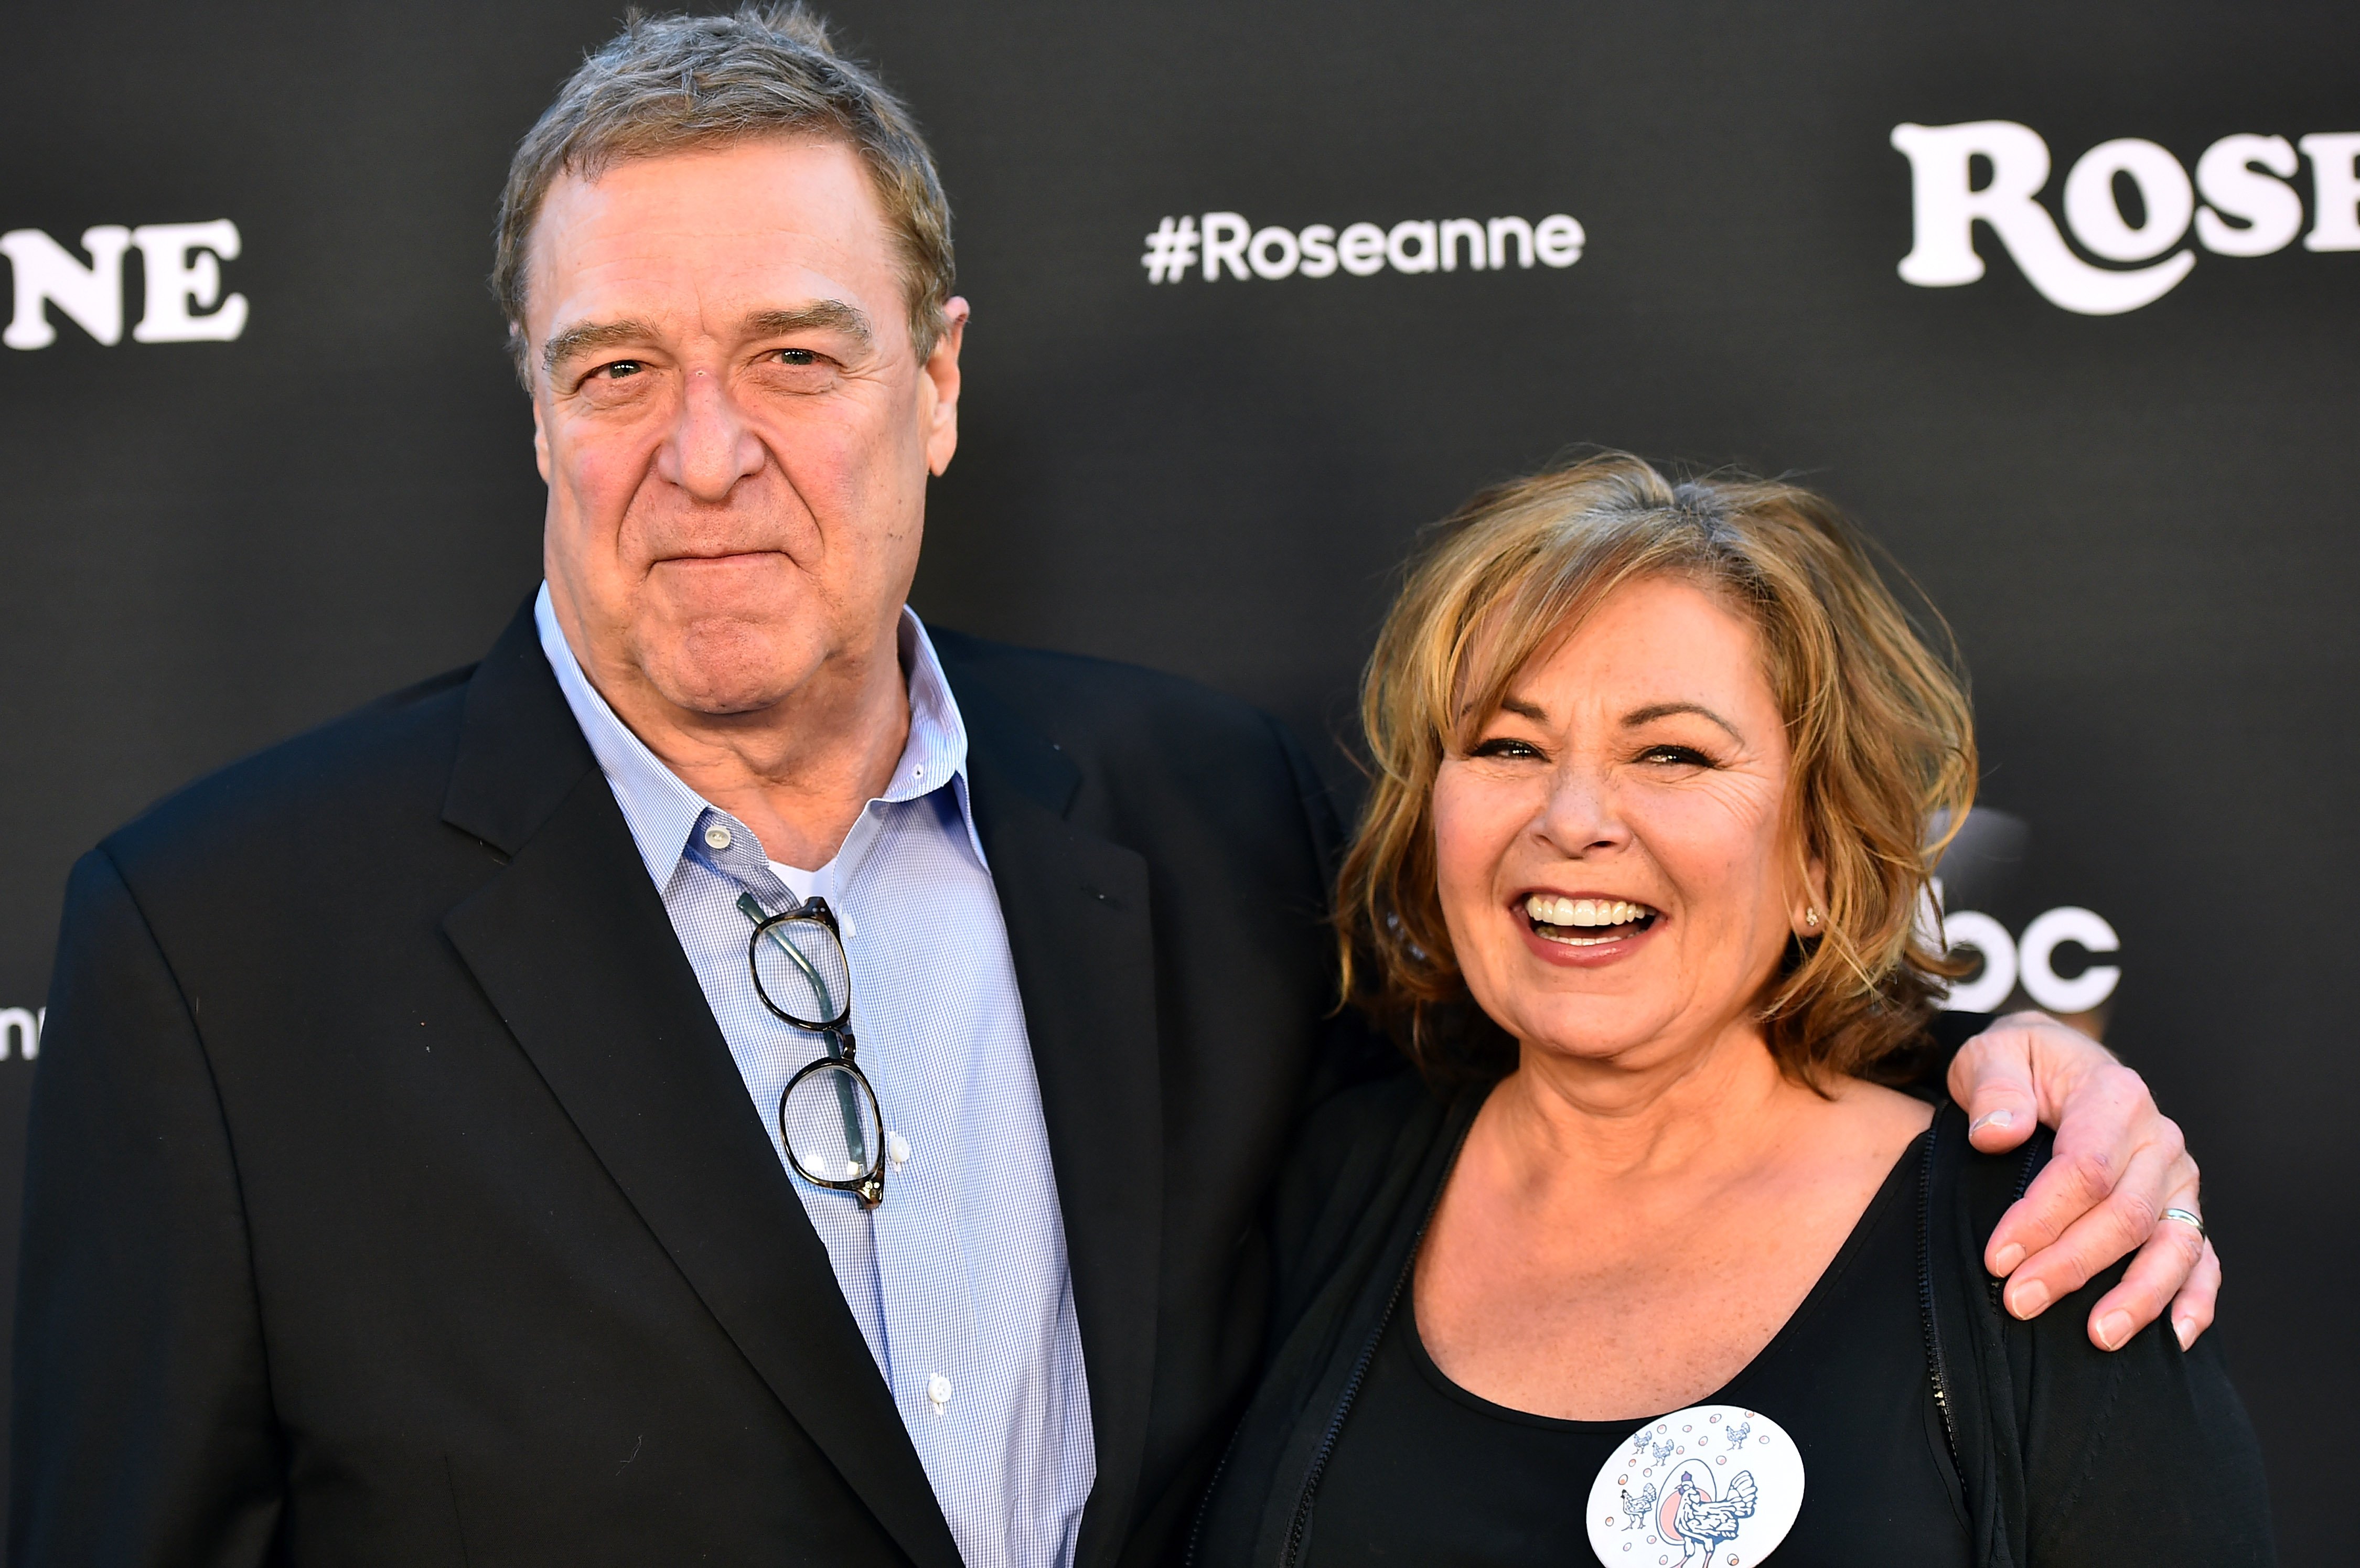 Roseanne Barr and John Goodman at the premiere of "Roseanne" on March 23, 2018 | Source: Getty Images